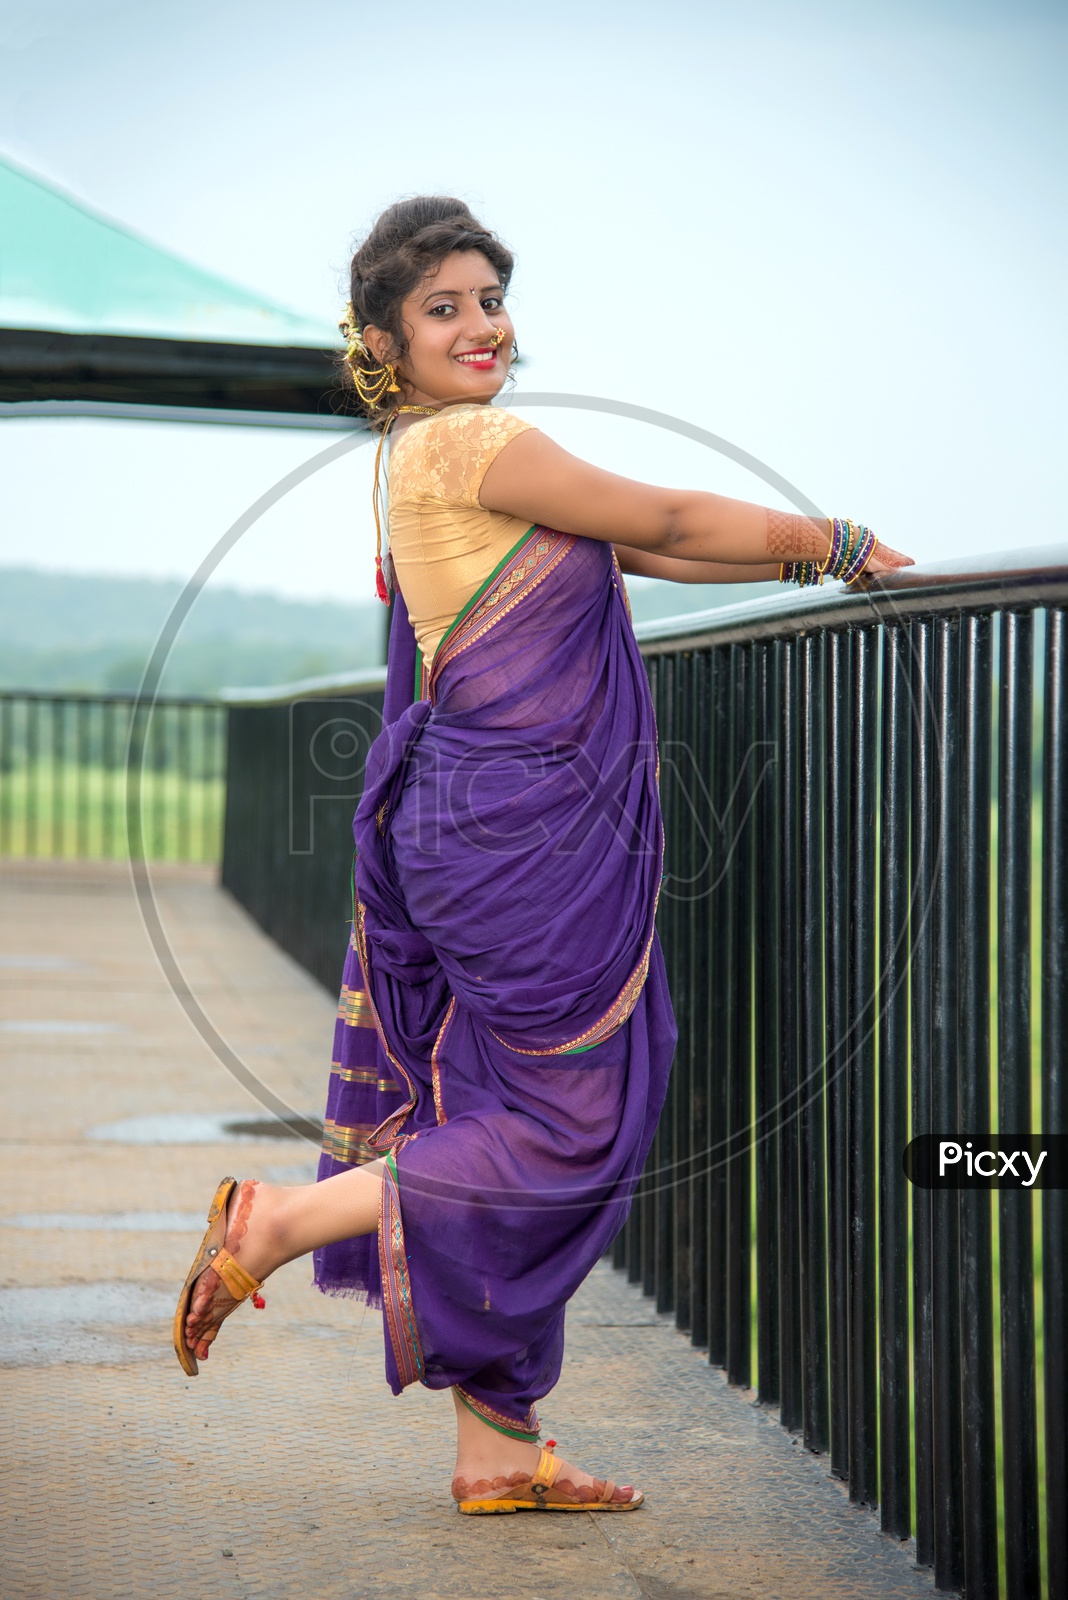 Young Woman Posing While Wearing Traditional Sari, Indian, Festival,  Transparent PNG Transparent Image and Clipart for Free Download